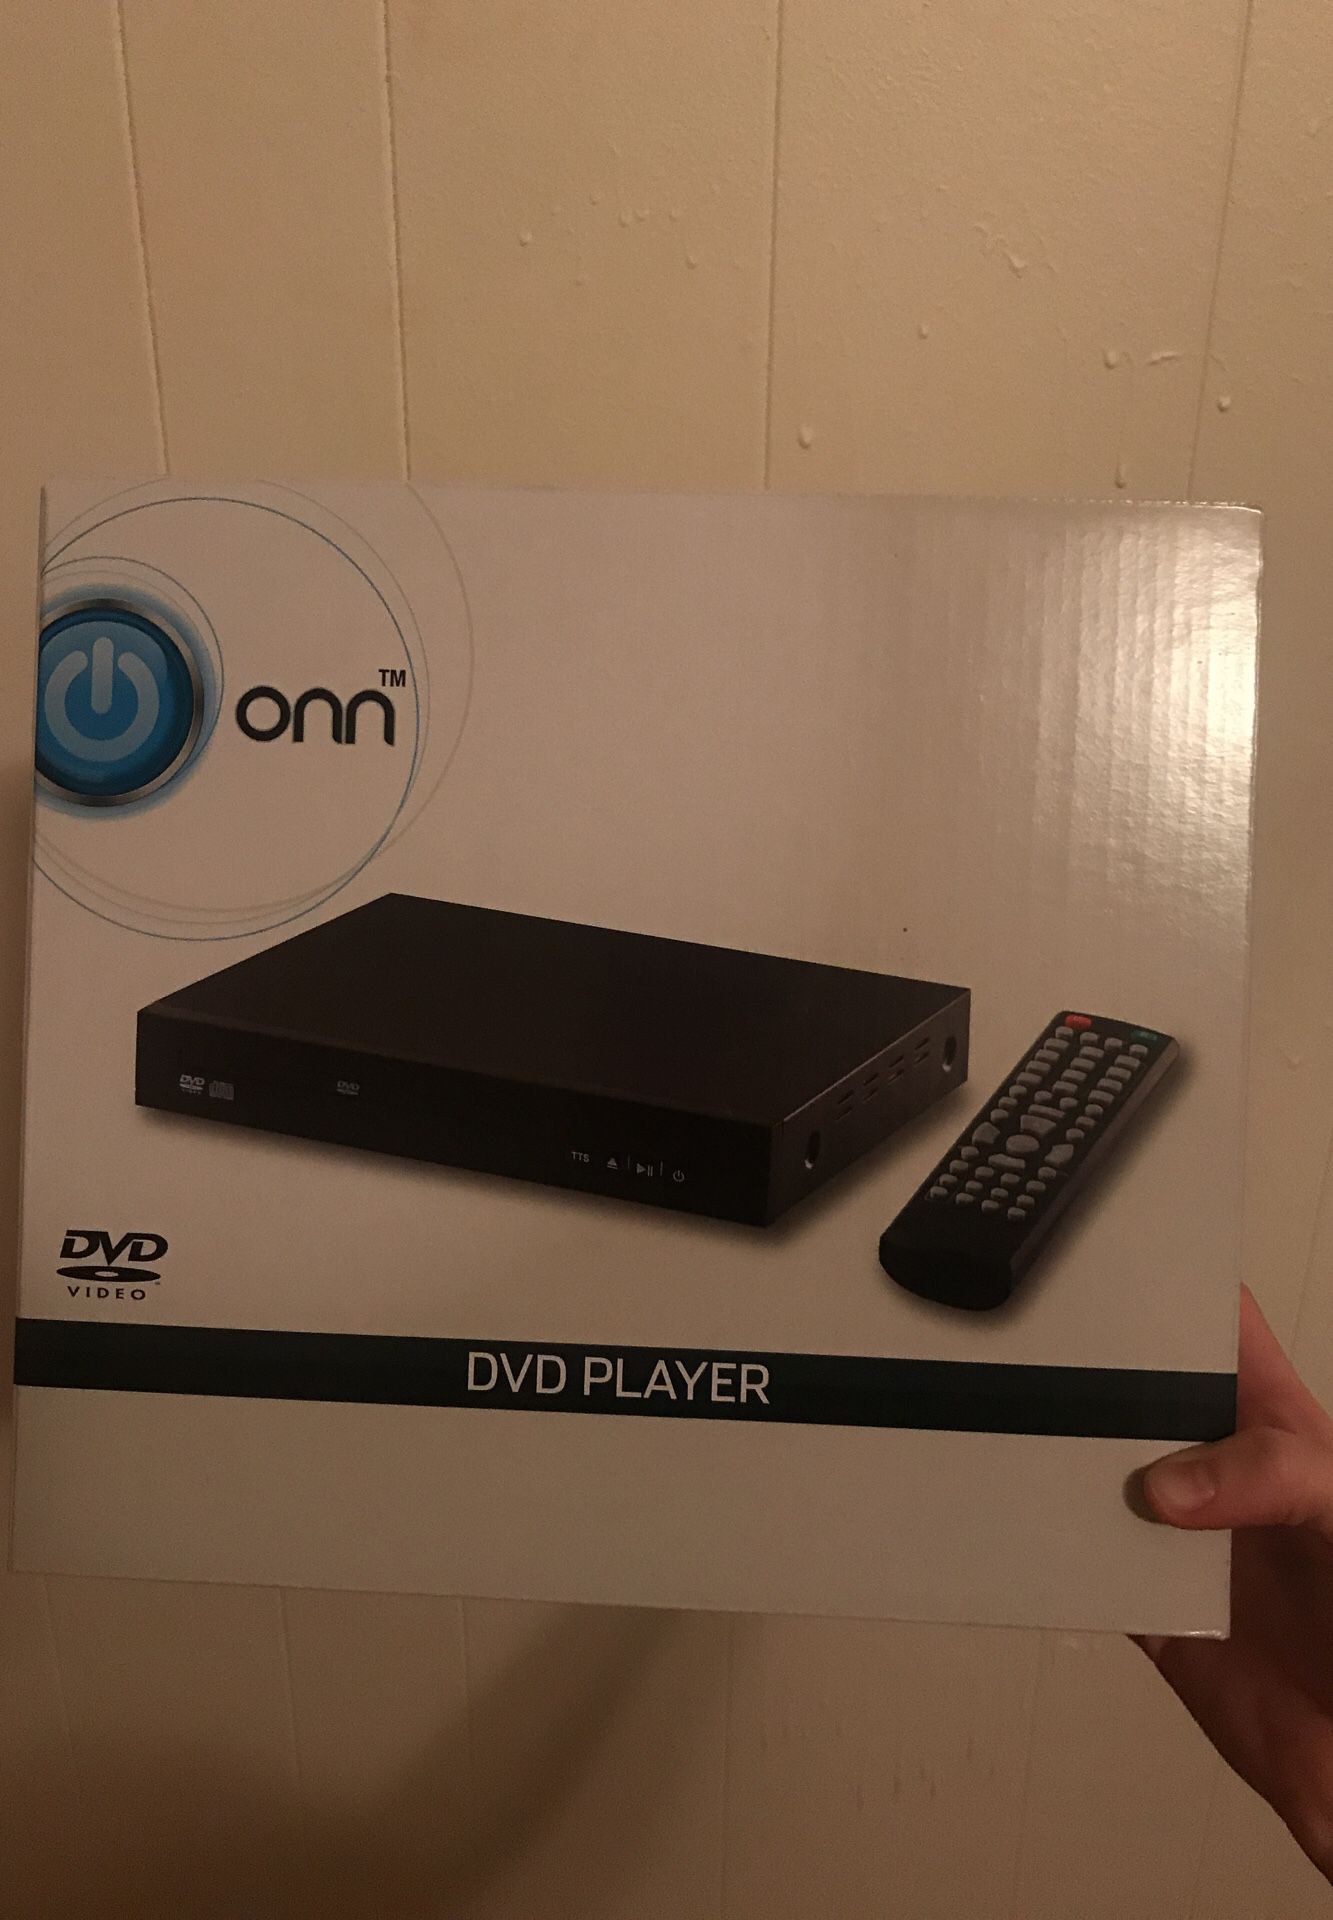 DVD player never opened